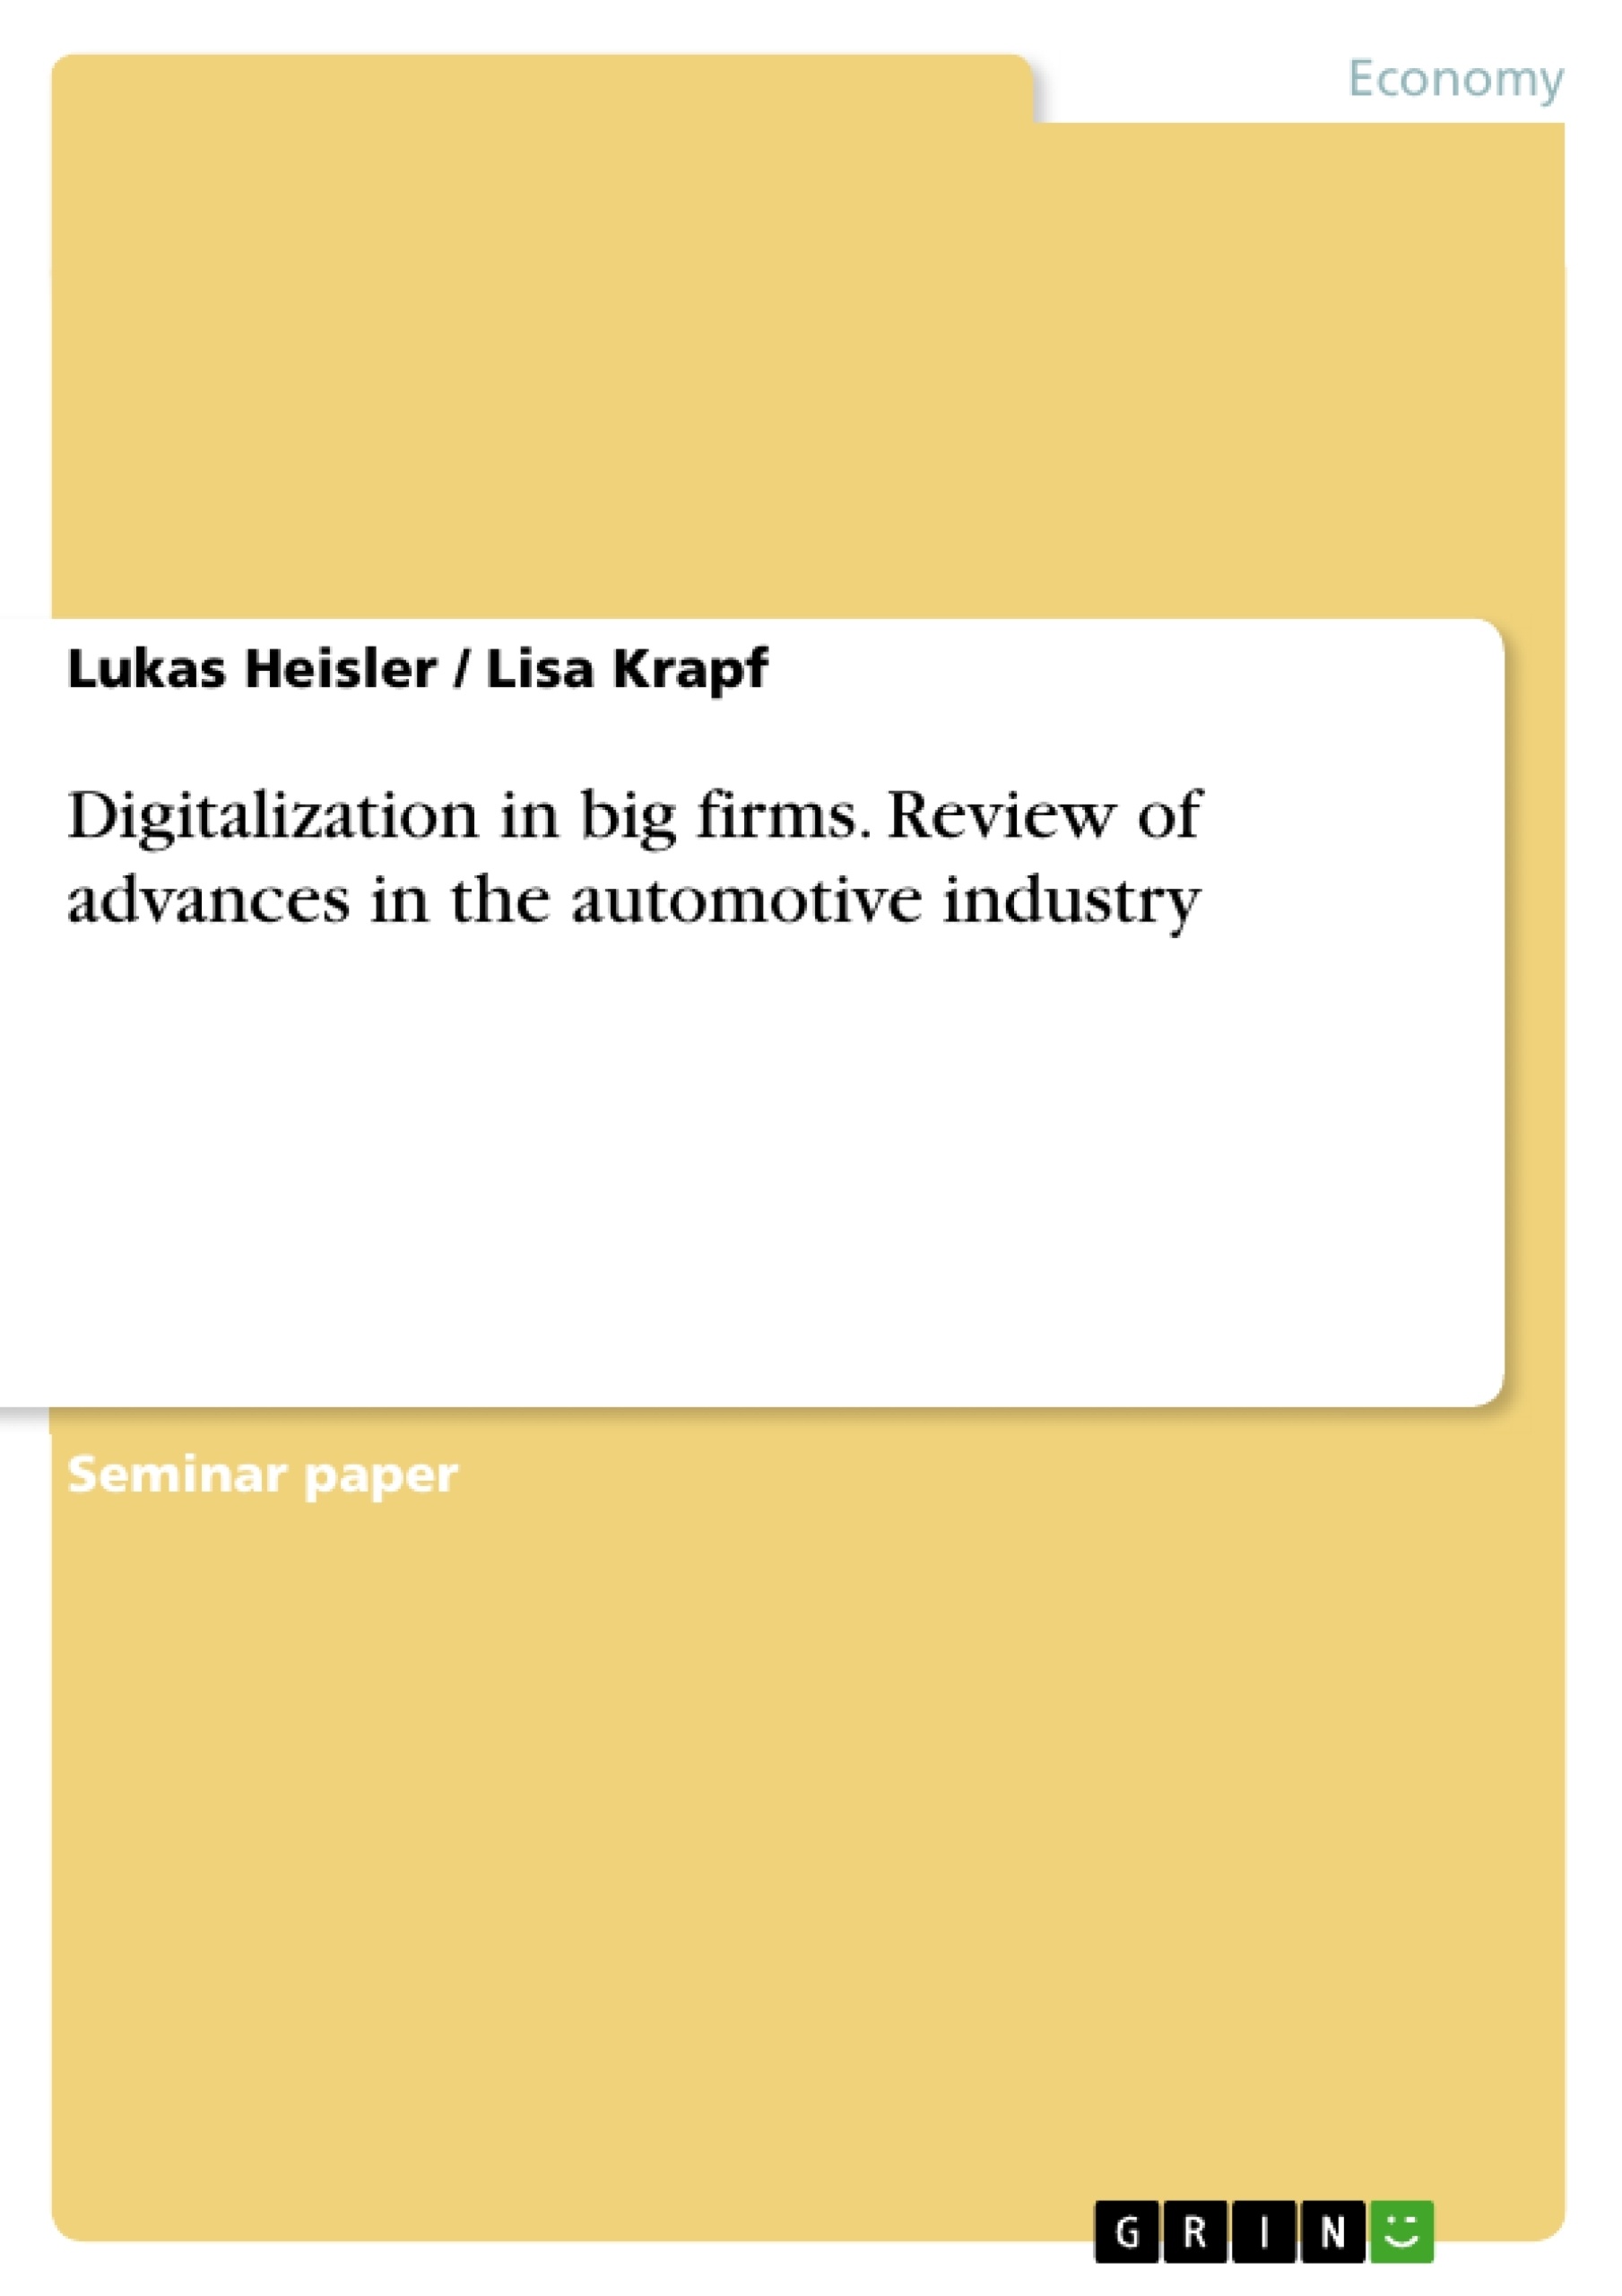 Title: Digitalization in big firms. Review of advances in the automotive industry